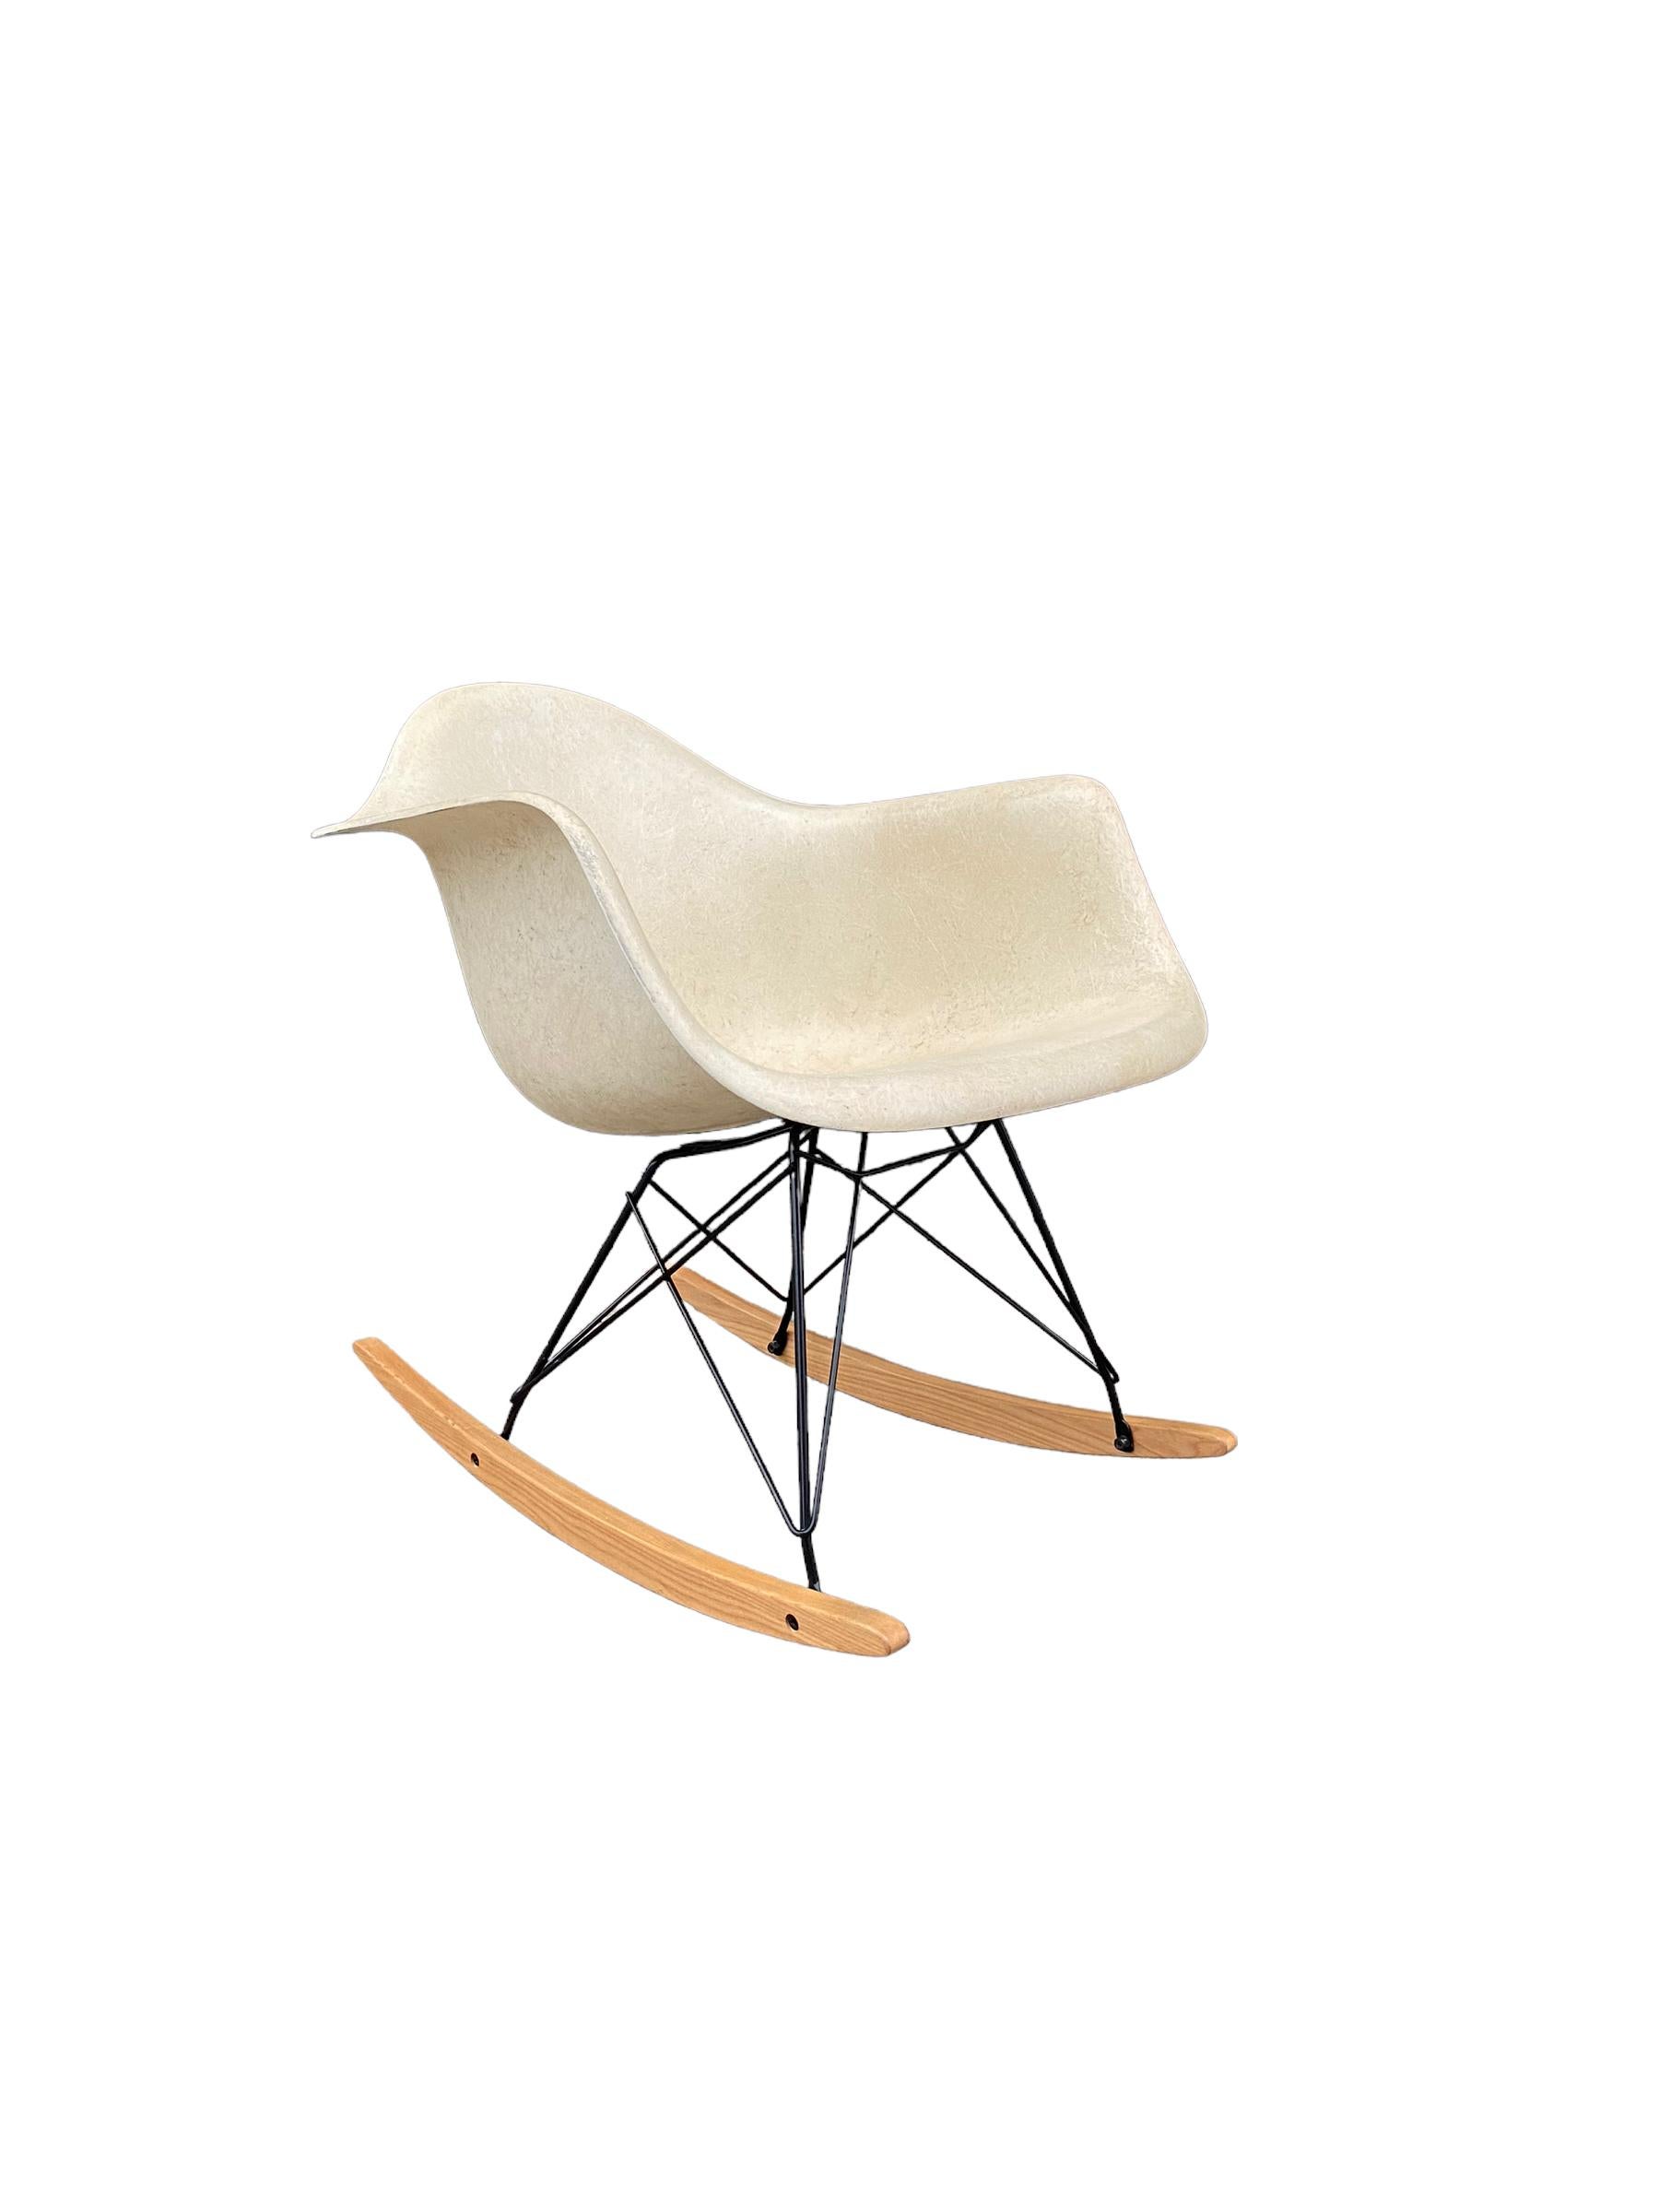 Parchment fiberglass RAR rocking chair by Charles and Ray Eames and manufactured by Herman Miller. Clean shell with no cracks or holes. Signed Herman Miller and guaranteed authentic. Rocking base with black rod frame and wood rails. Timeless mid